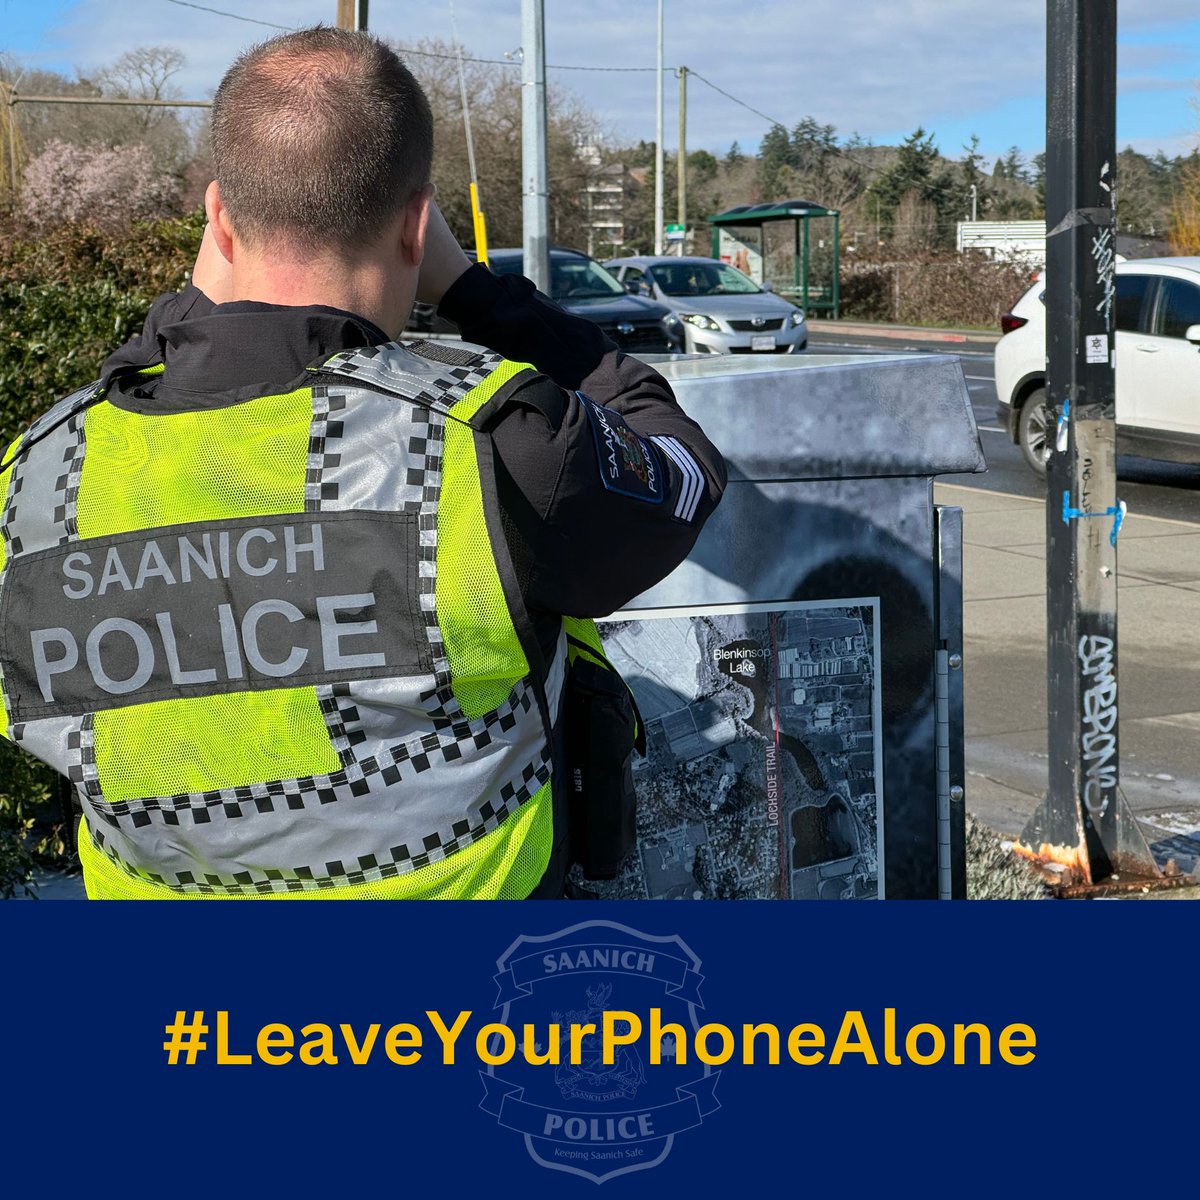 157 tickets for distracted driving! Our officers spent approximately 66 hours dedicated to distracted driving enforcement during the month of March and issued 157 tickets. Please remember to #LeaveYourPhoneAlone You’re 3.6 times more likely to crash if you’re using your phone